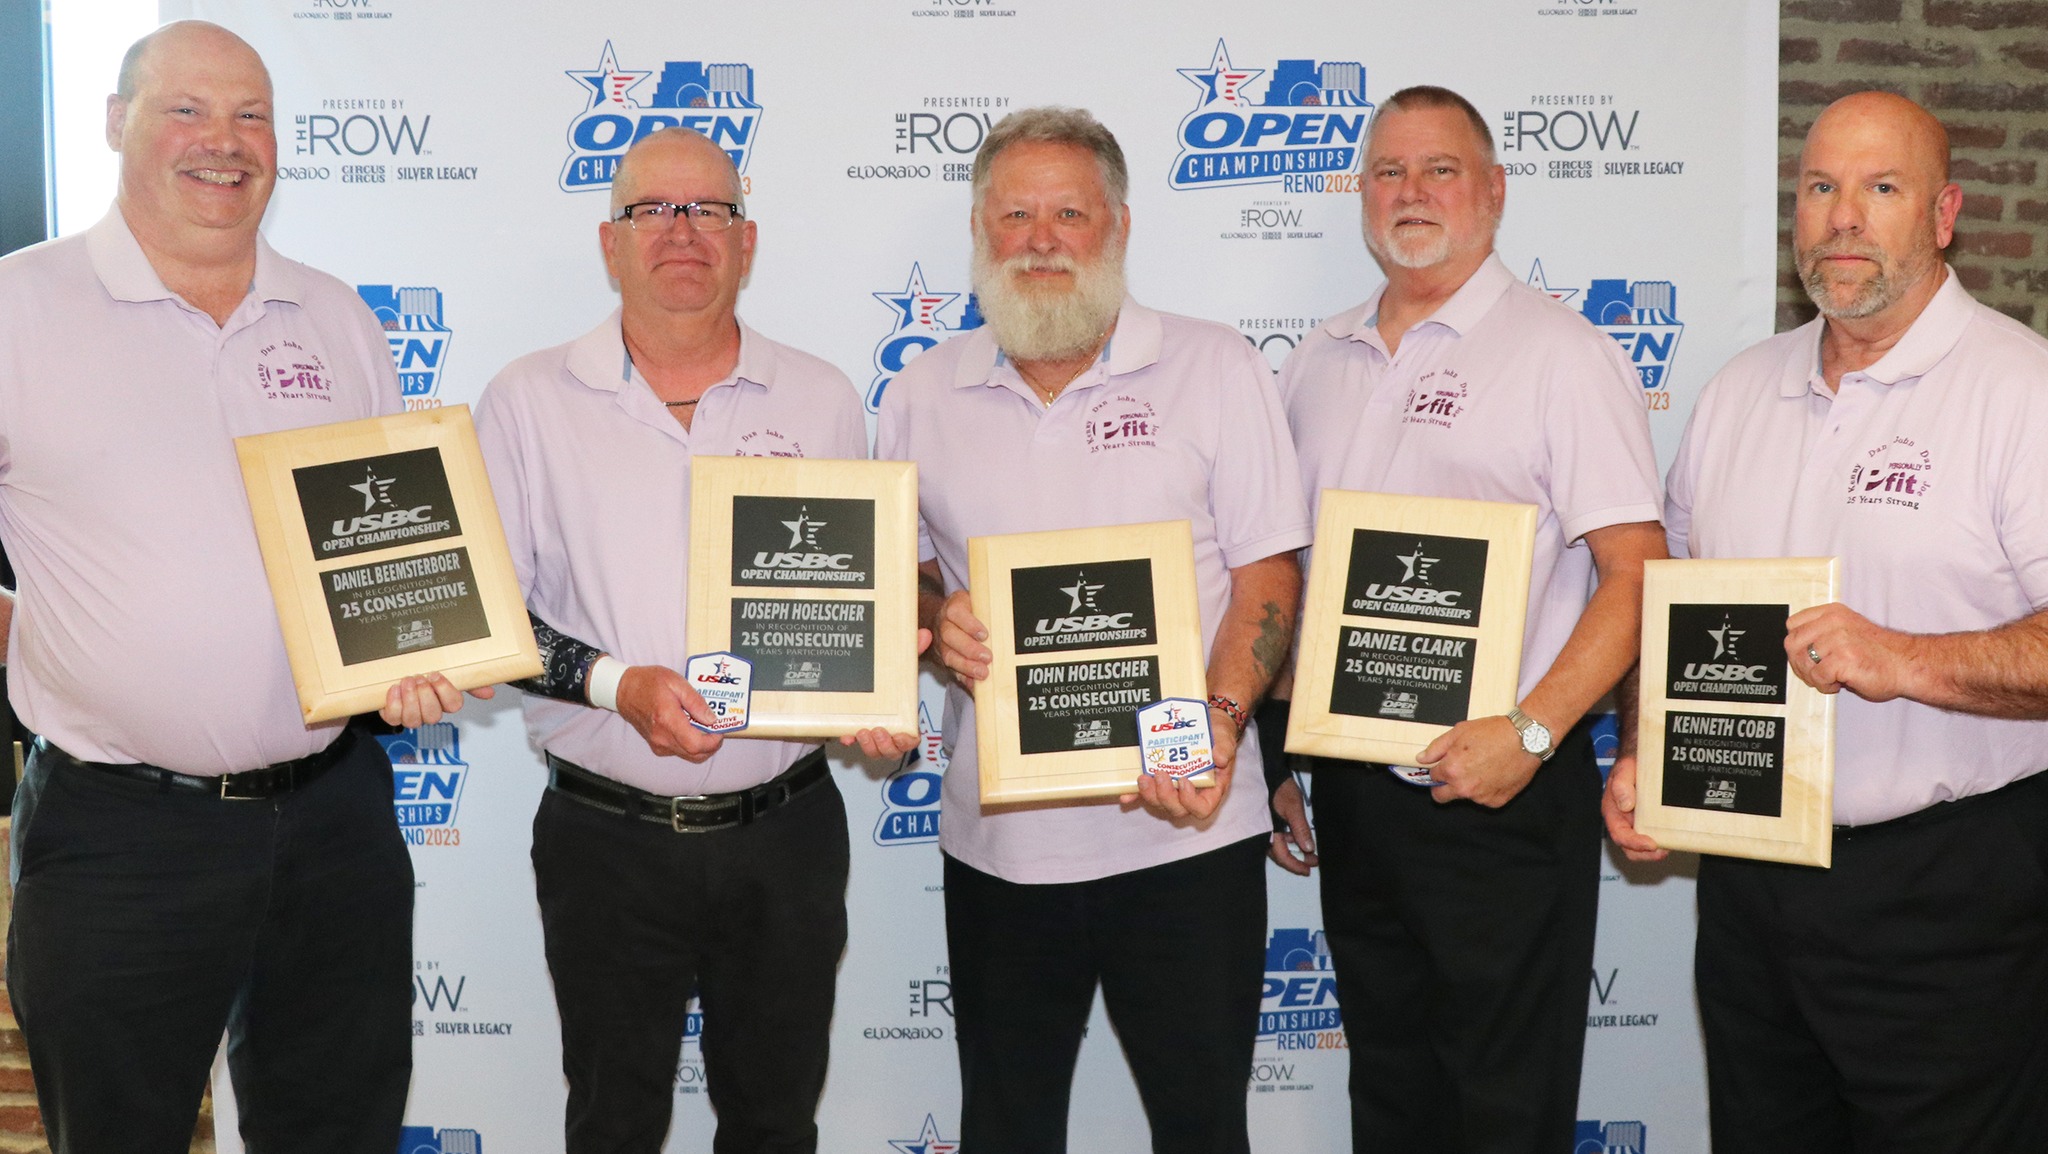 The members of PFit 25 with their 25-year plaques at the 2023 USBC Open Championships